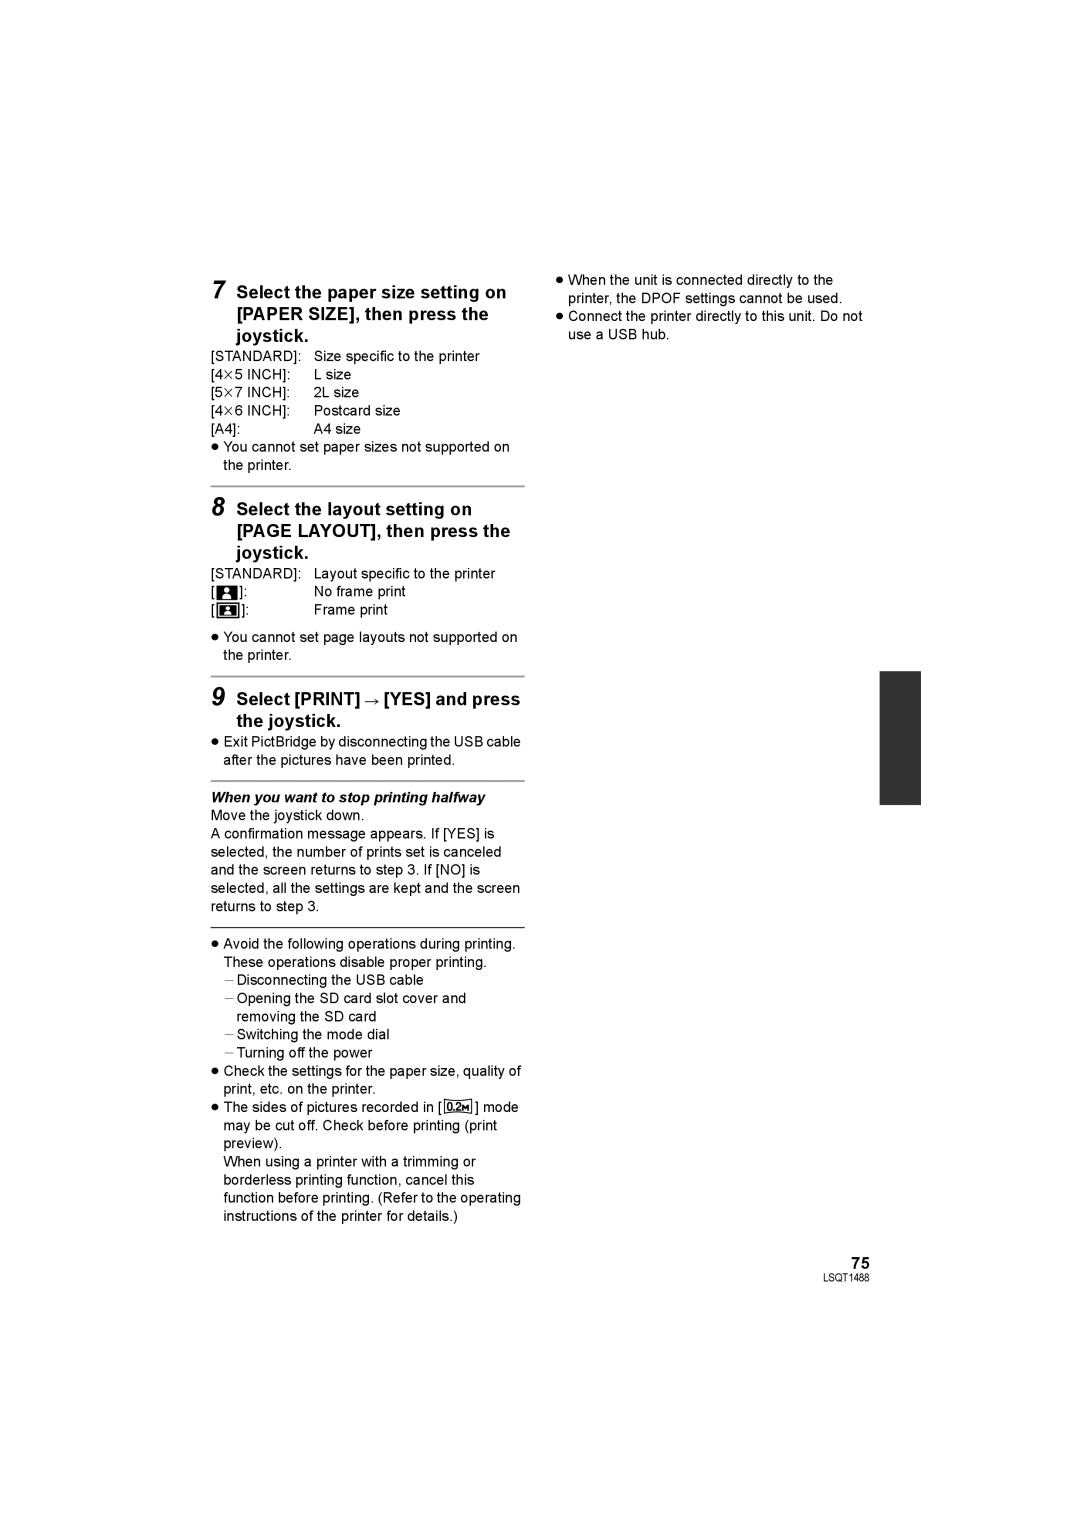 Panasonic SDR-S26PC operating instructions Select Print # YES and press the joystick, Standard 